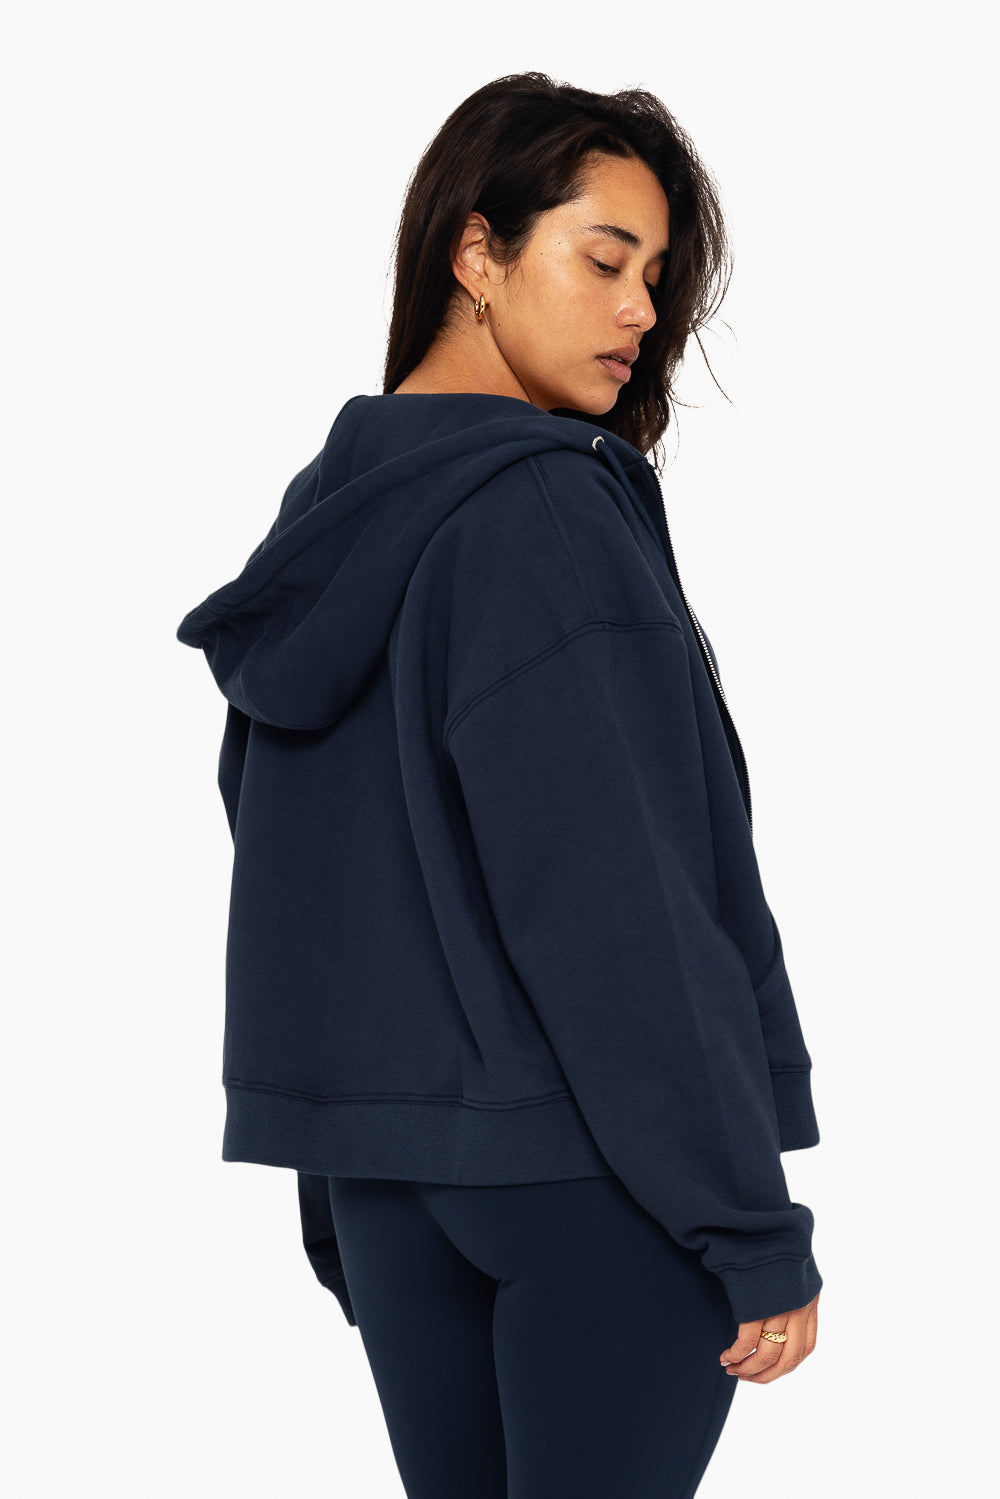 SET™ EMBROIDERED HEAVYWEIGHT SWEATS ZIP HOODIE IN OXFORD